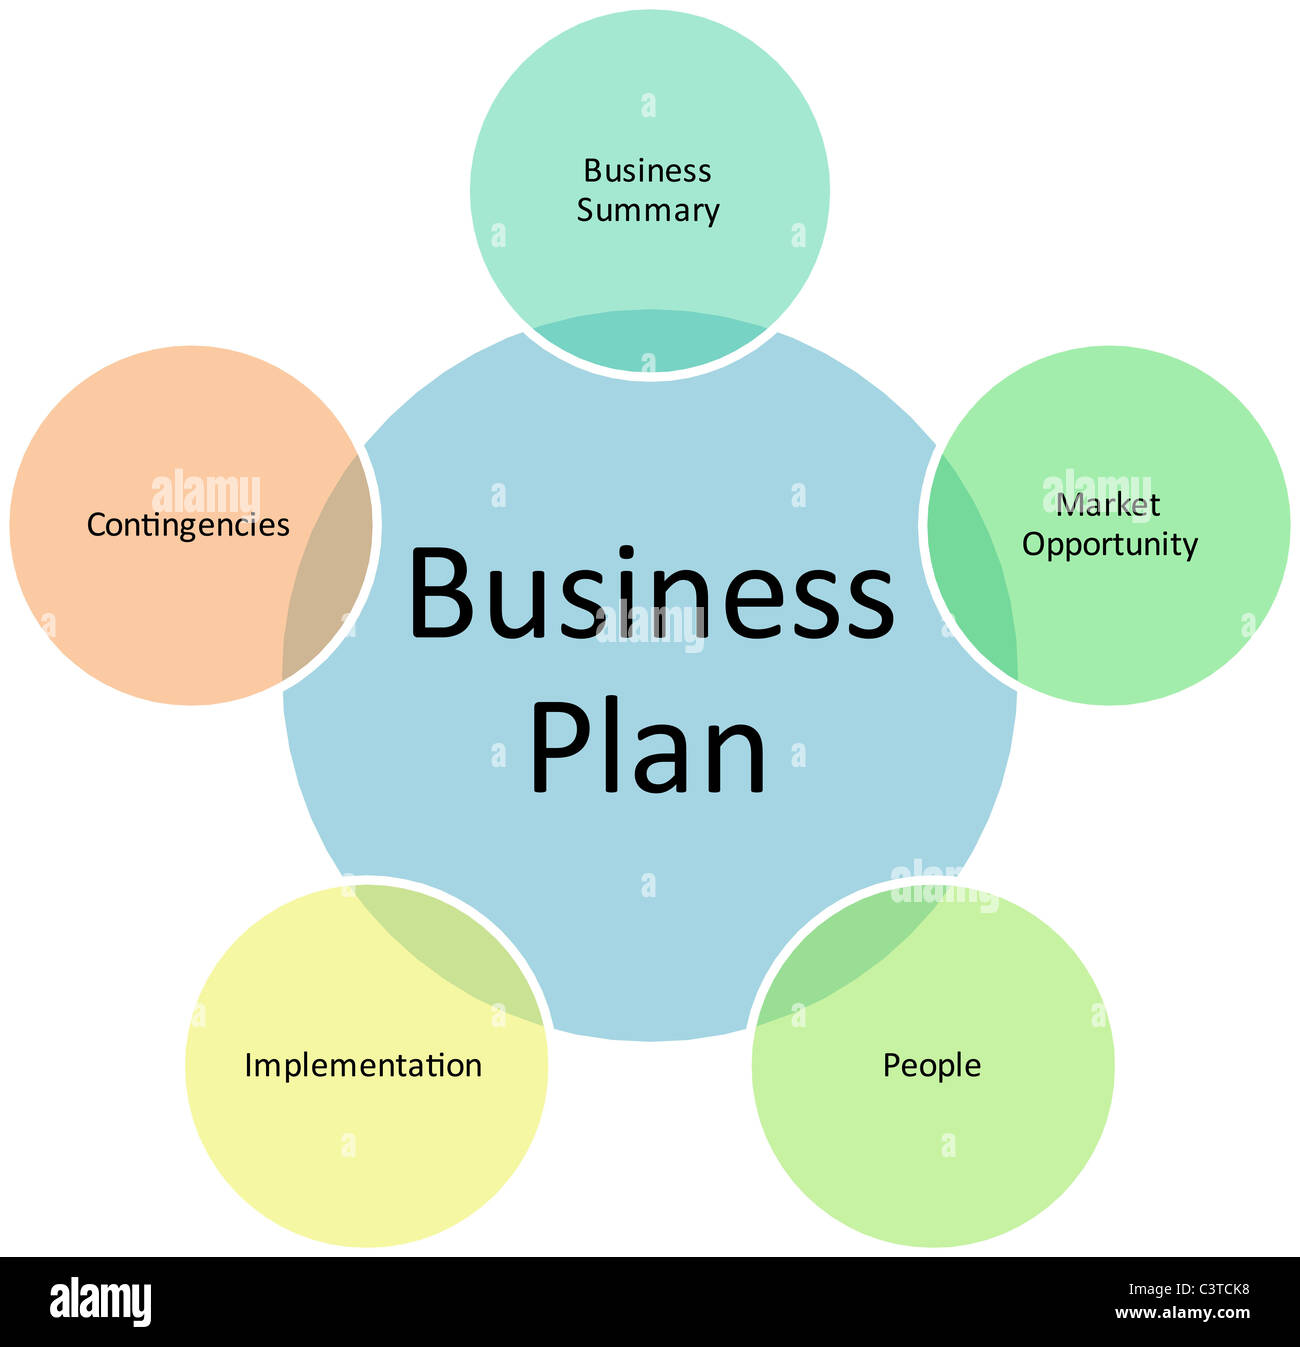 business plan management and organization example